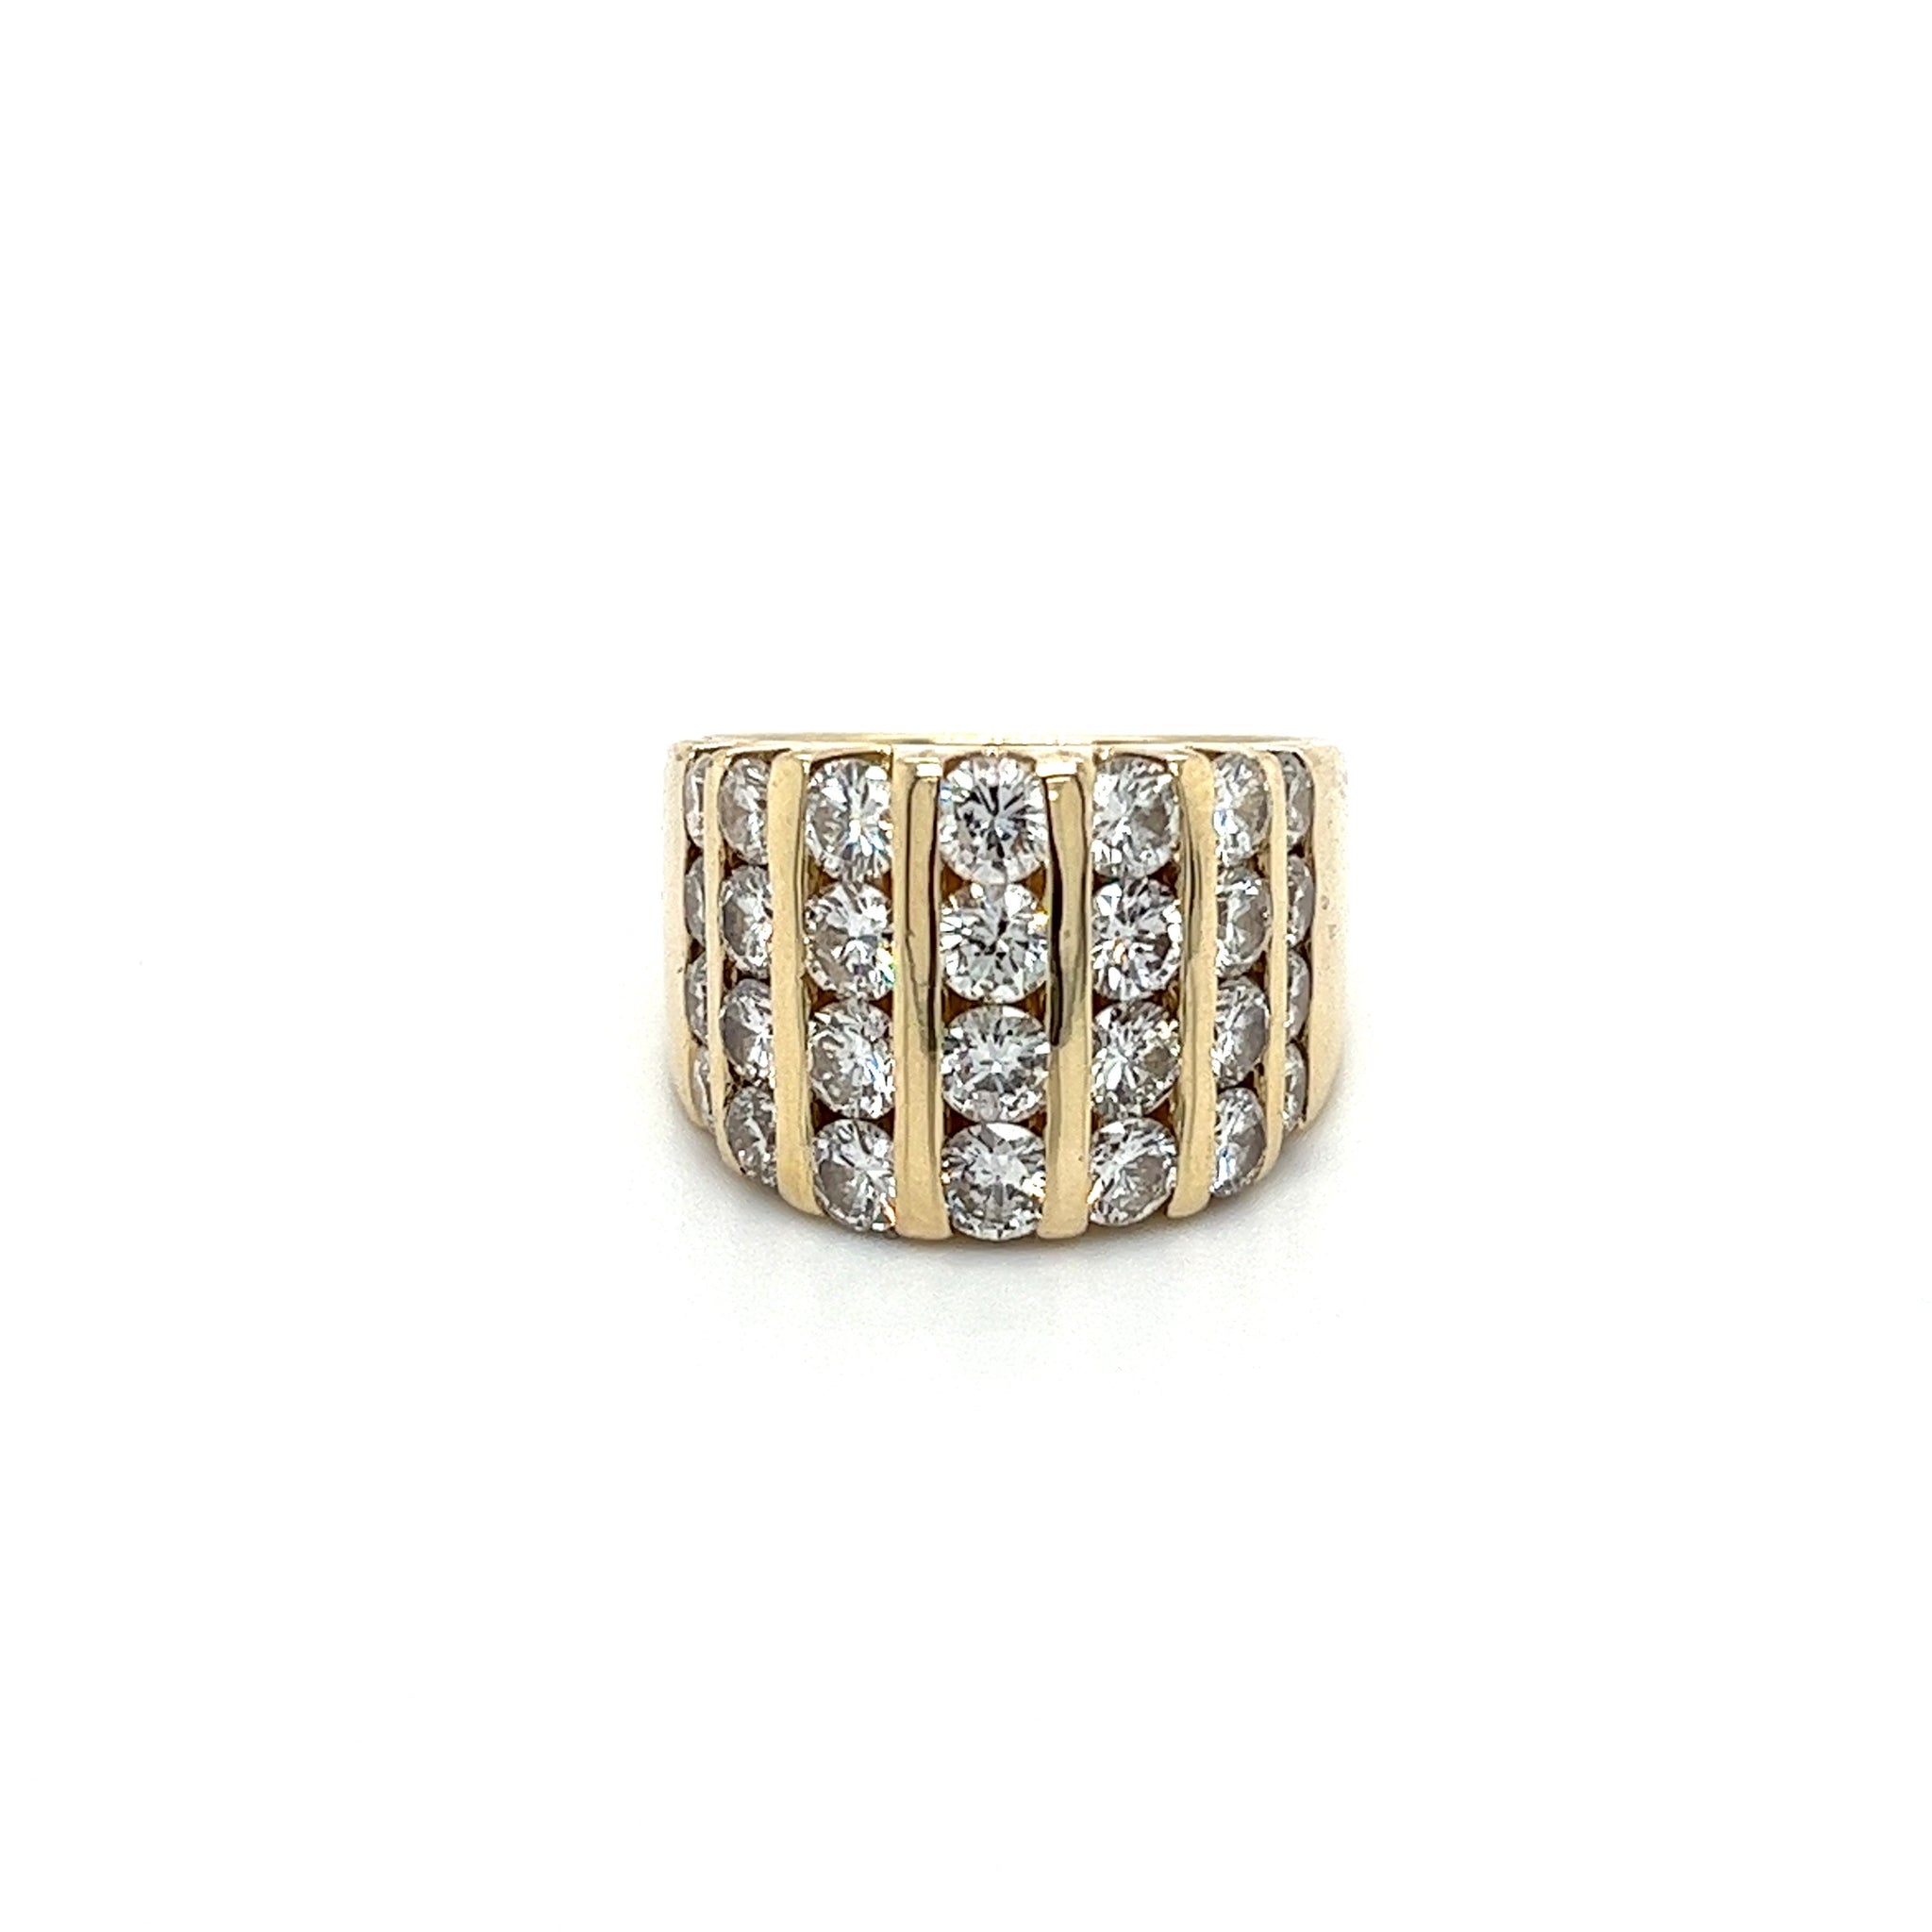 3.8 Carat Channel Set Round Cut Diamond Cluster Ring in 14K Yellow Gold